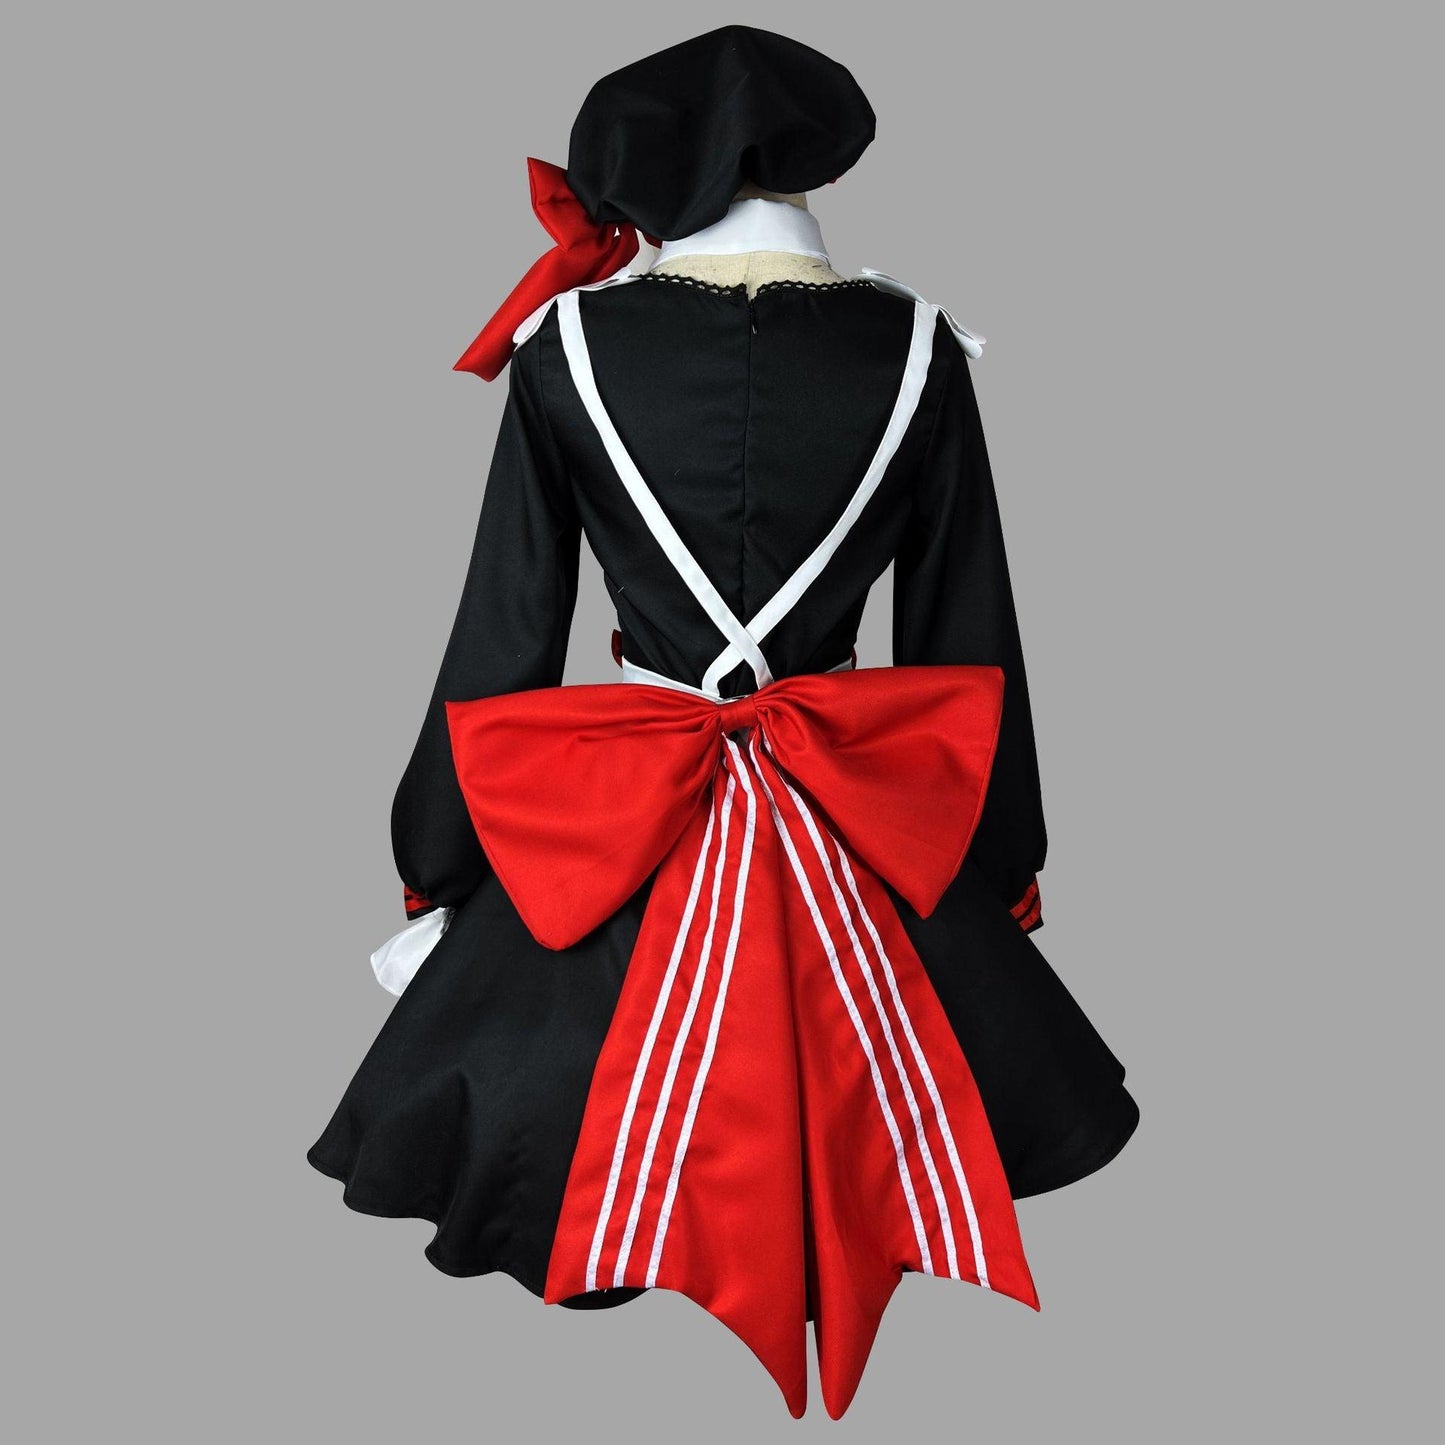 Genshin Impact Noelle Restaurant Uniform Maid Outfit Dress Anime Game Cosplay Costume